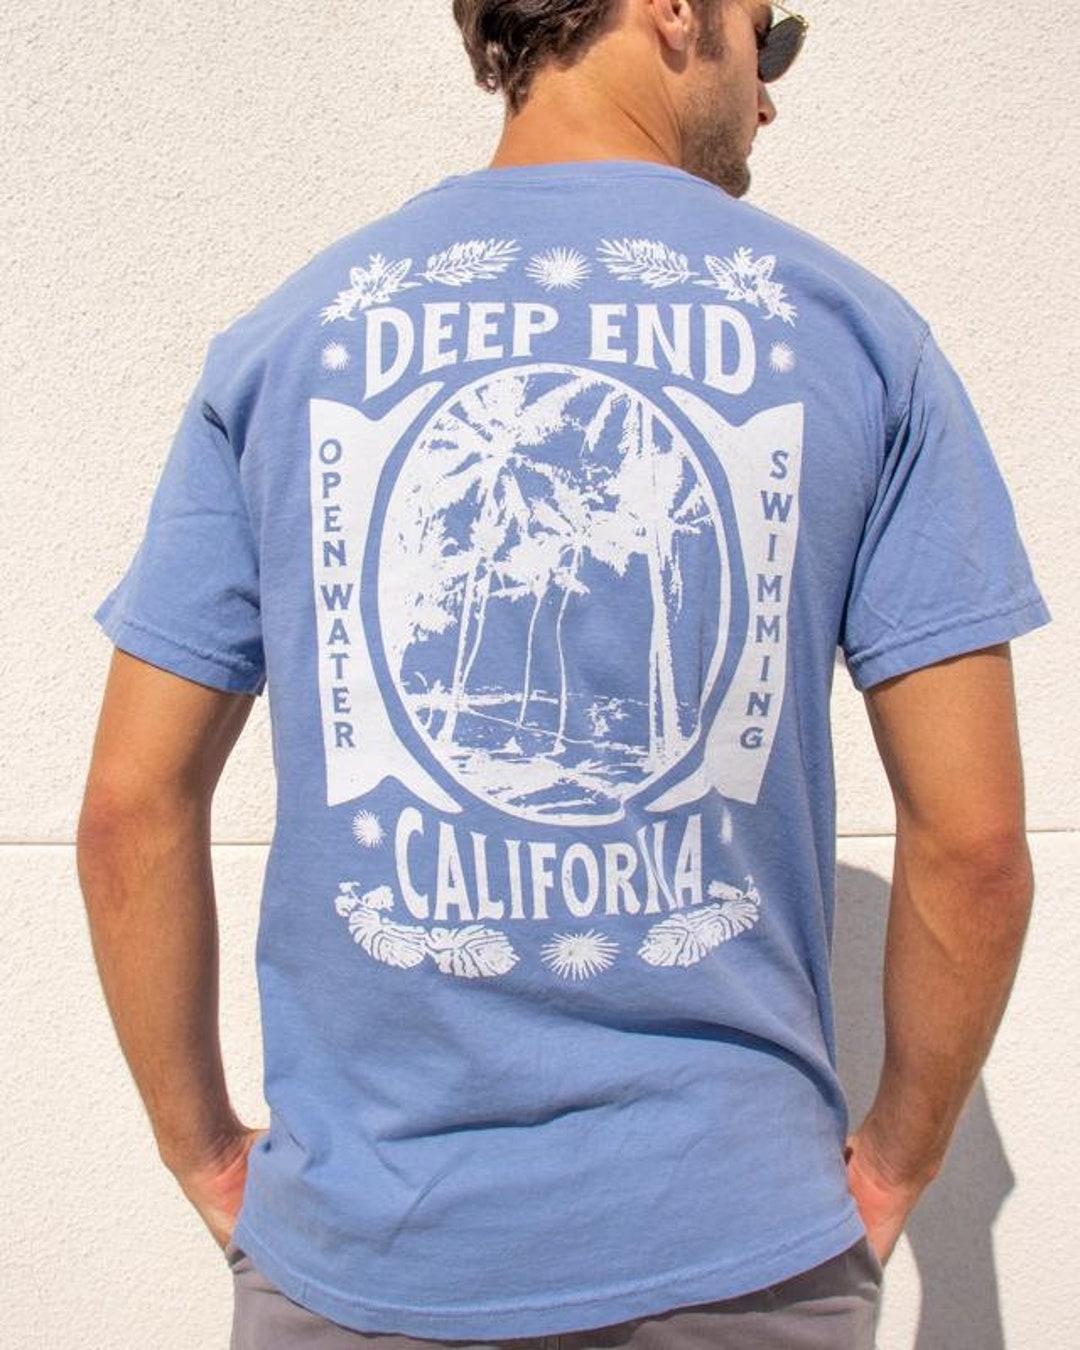 California Open Water Swimming Vintage Tee I Swimming I Water - Etsy